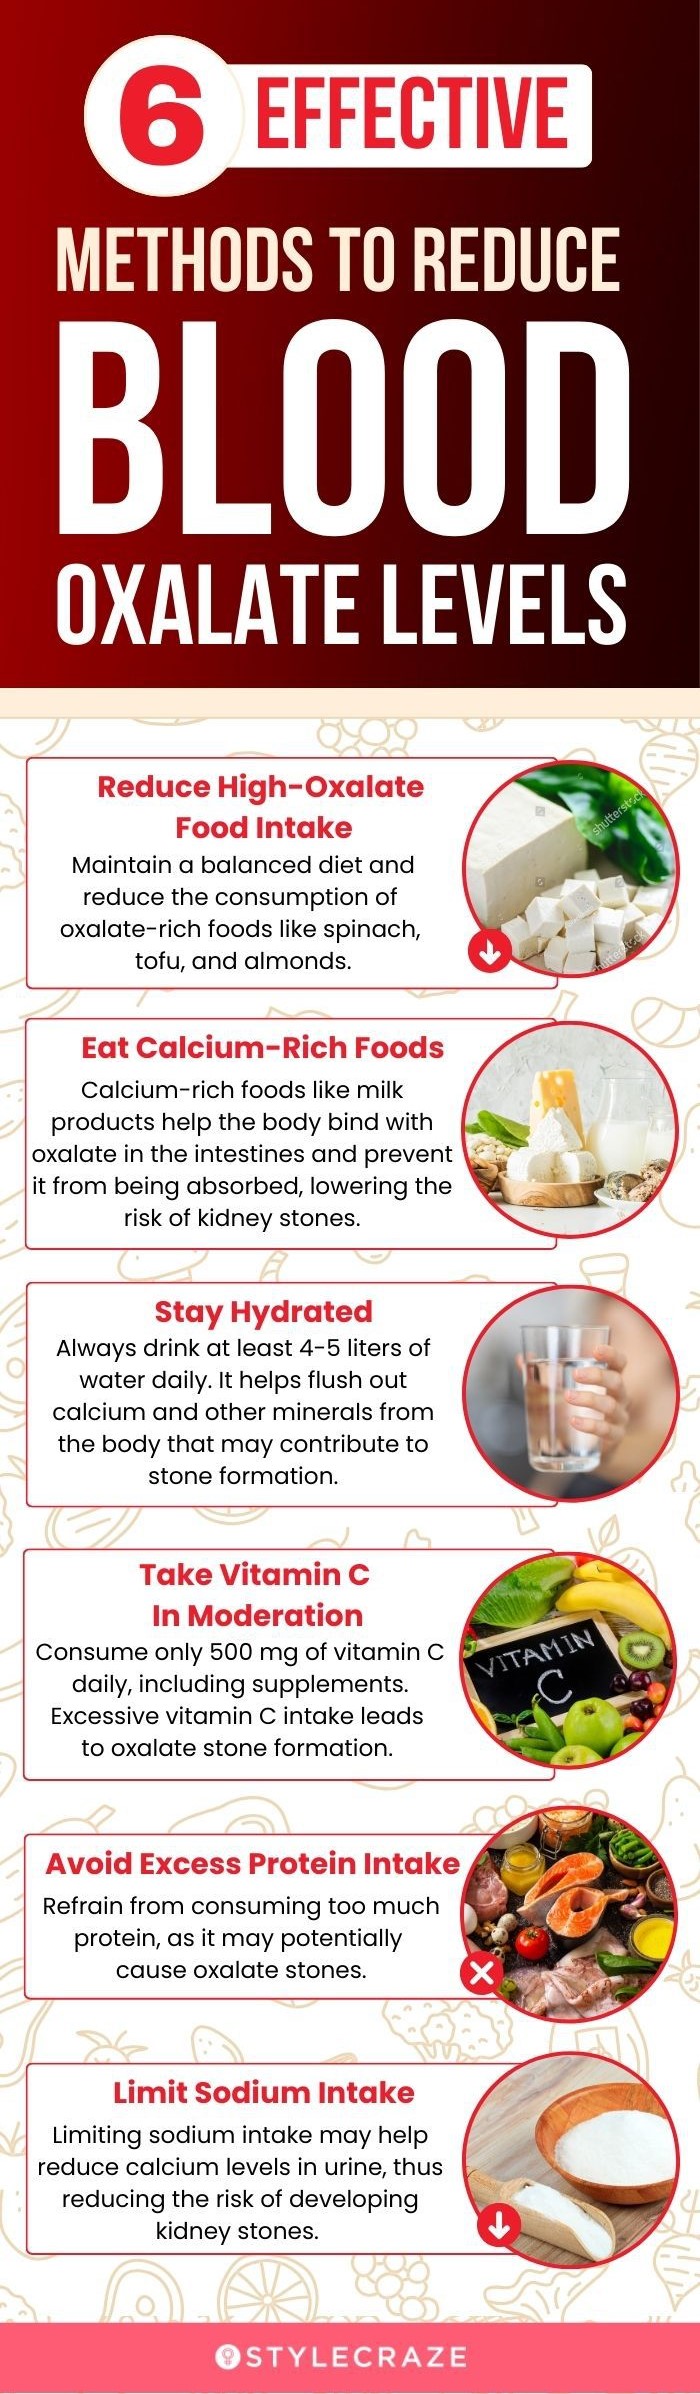 6 effective methods to prevent blood oxalate levels (infographic)